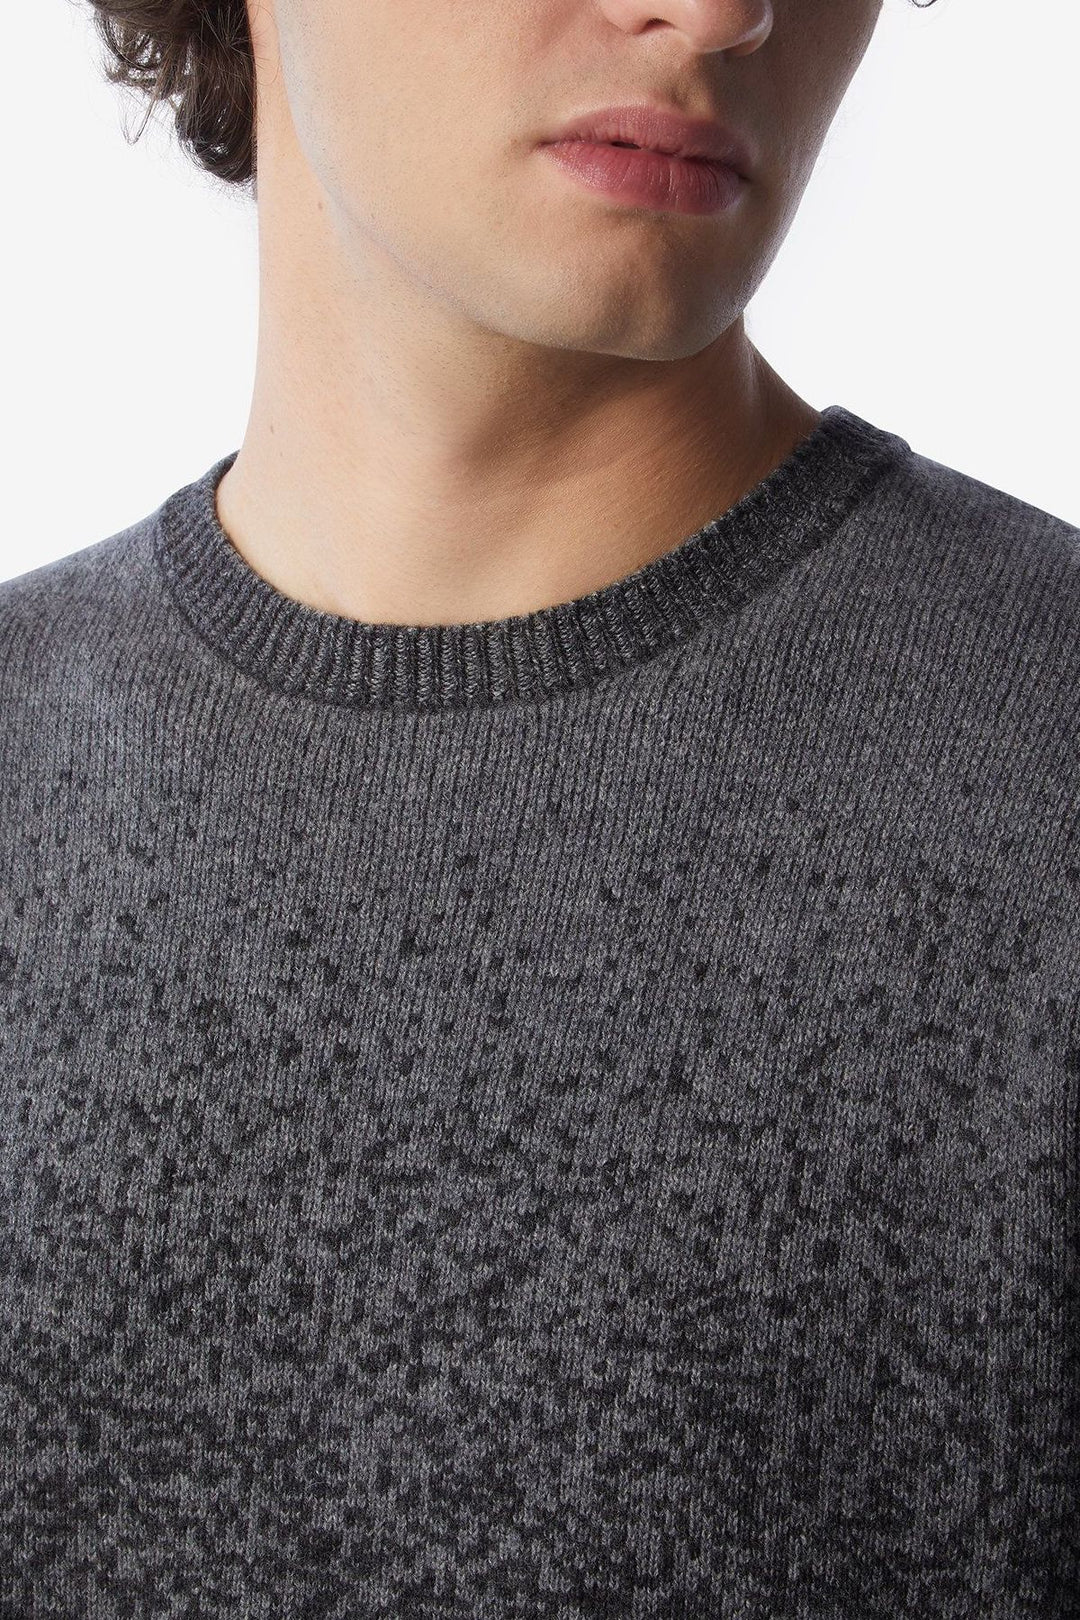 Wool and cashmere sweater with gray pixel pattern